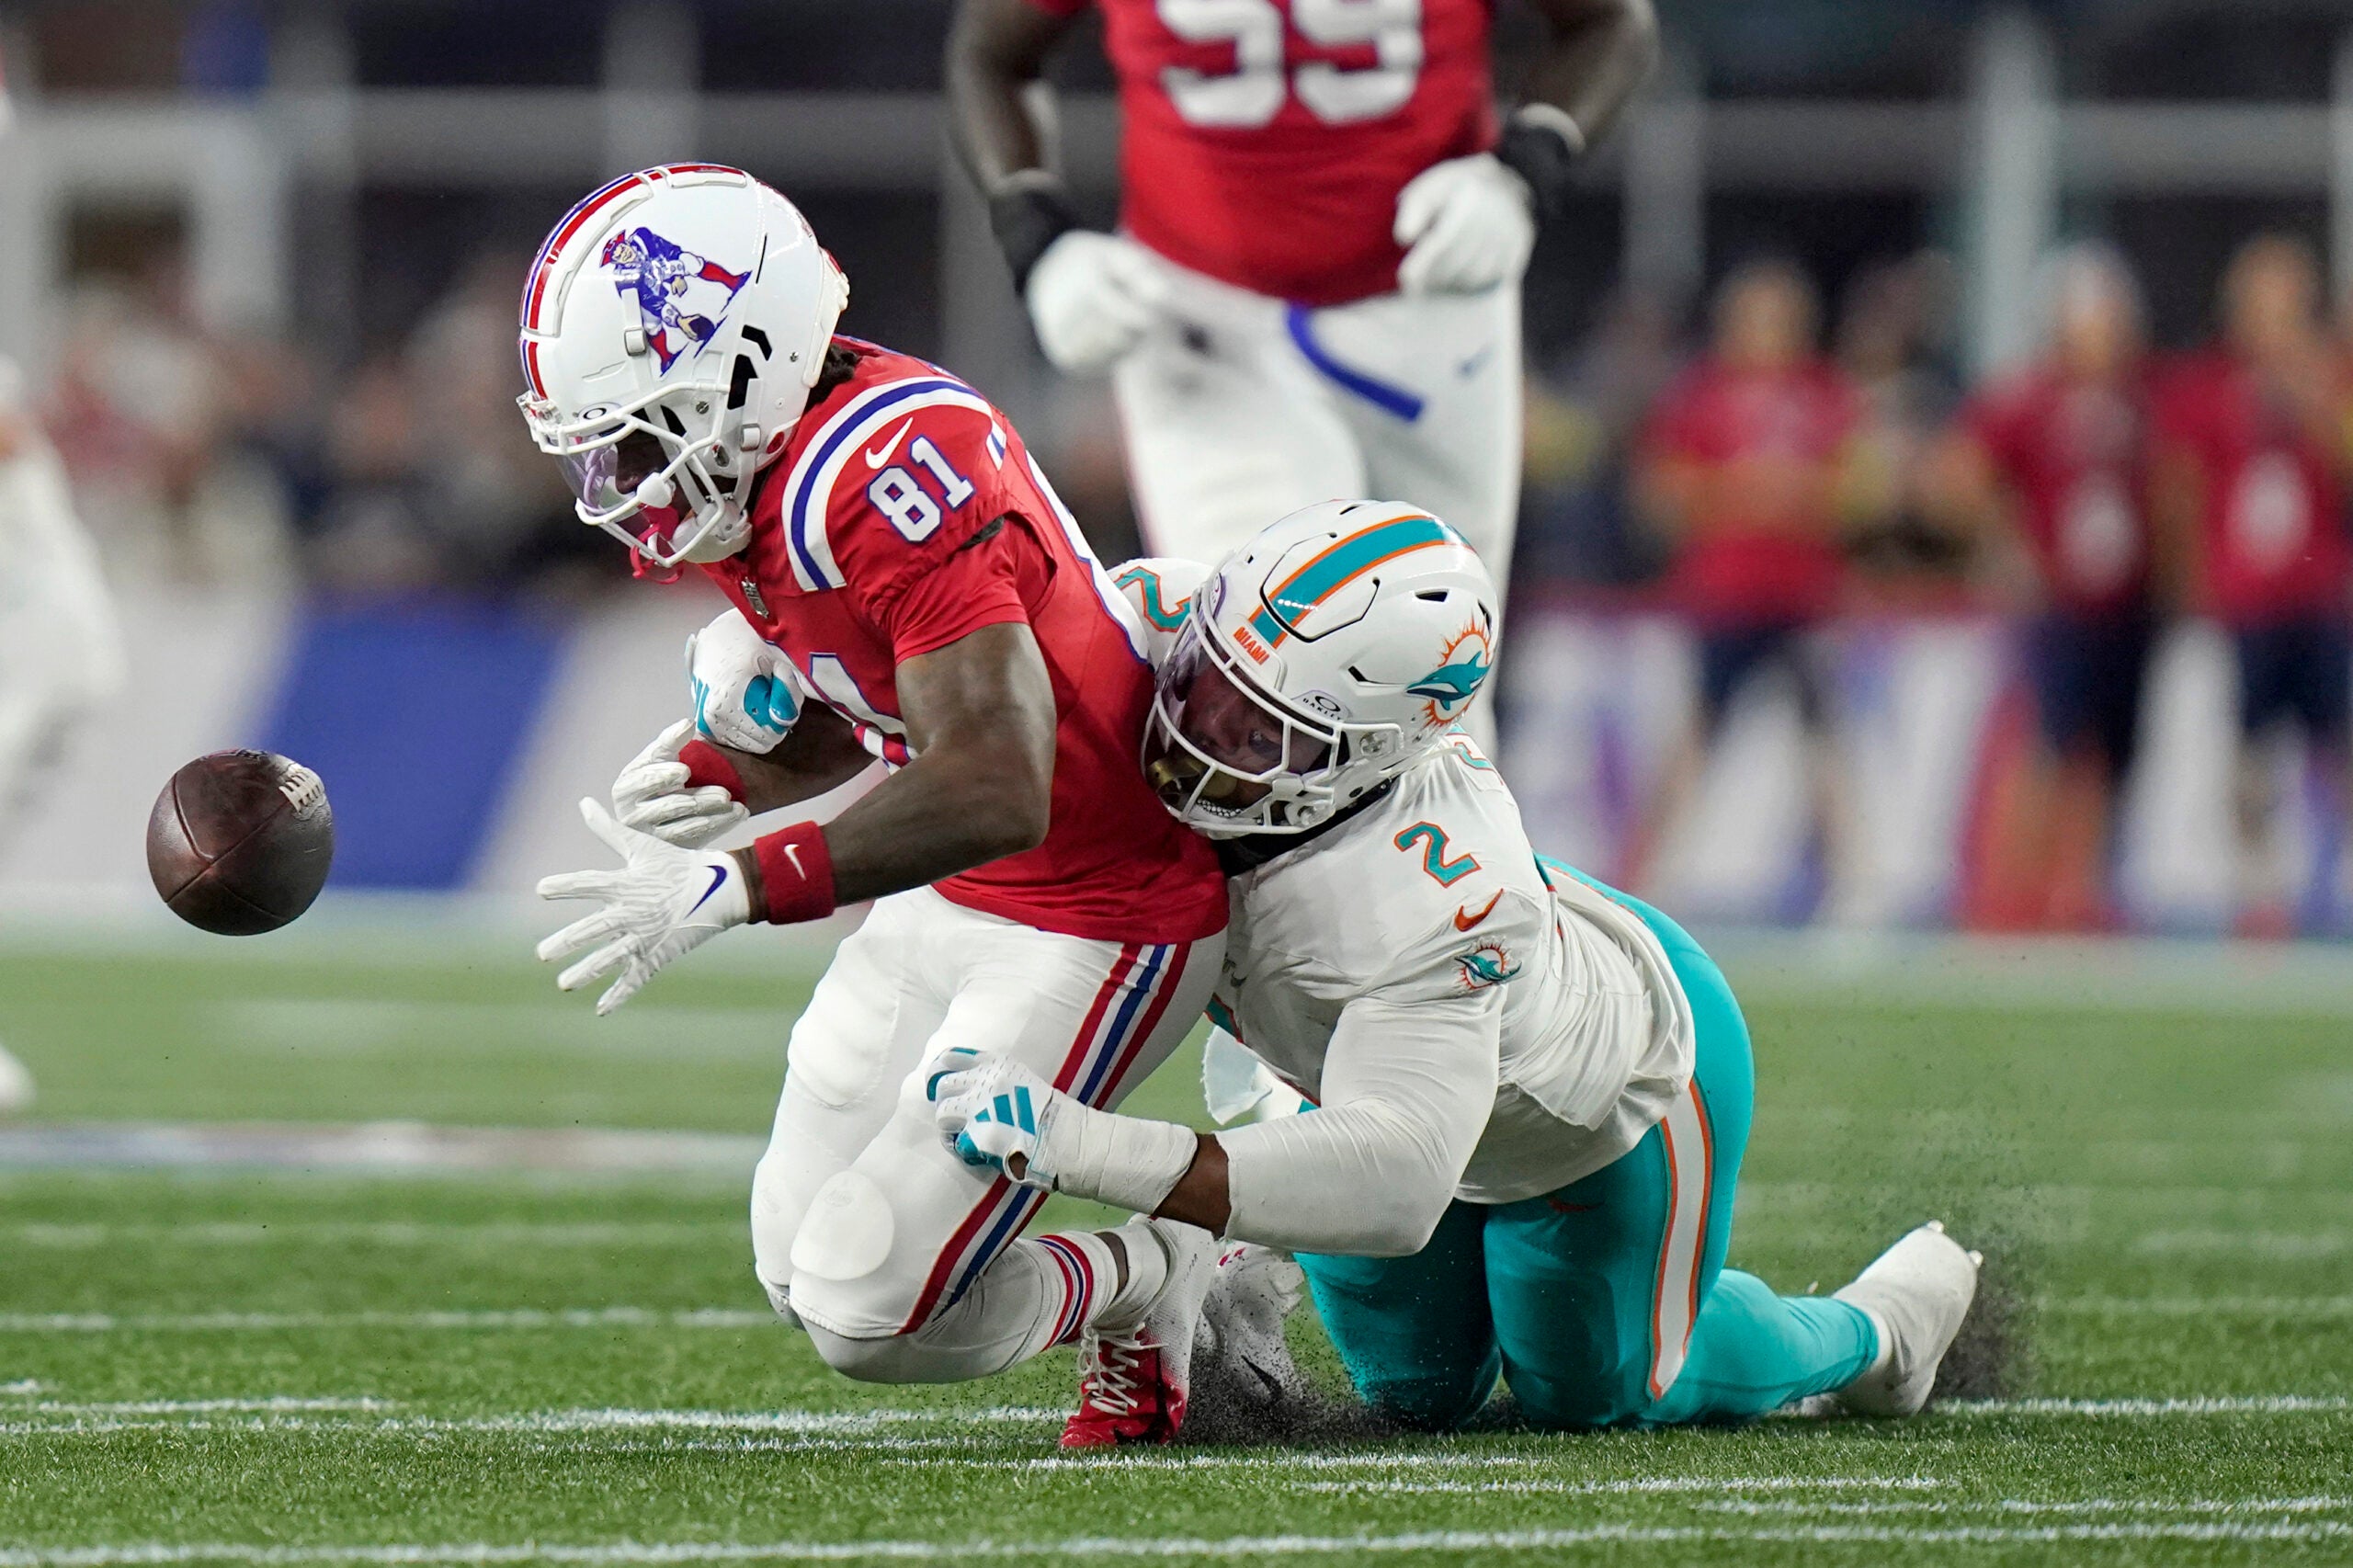 Miami Dolphins linebacker Bradley Chubb, right, strips the ball from the hands of New England Patriots wide receiver Demario Douglas (81) during the first half of an NFL football game, Sunday, Sept. 17, 2023, in Foxborough, Mass.